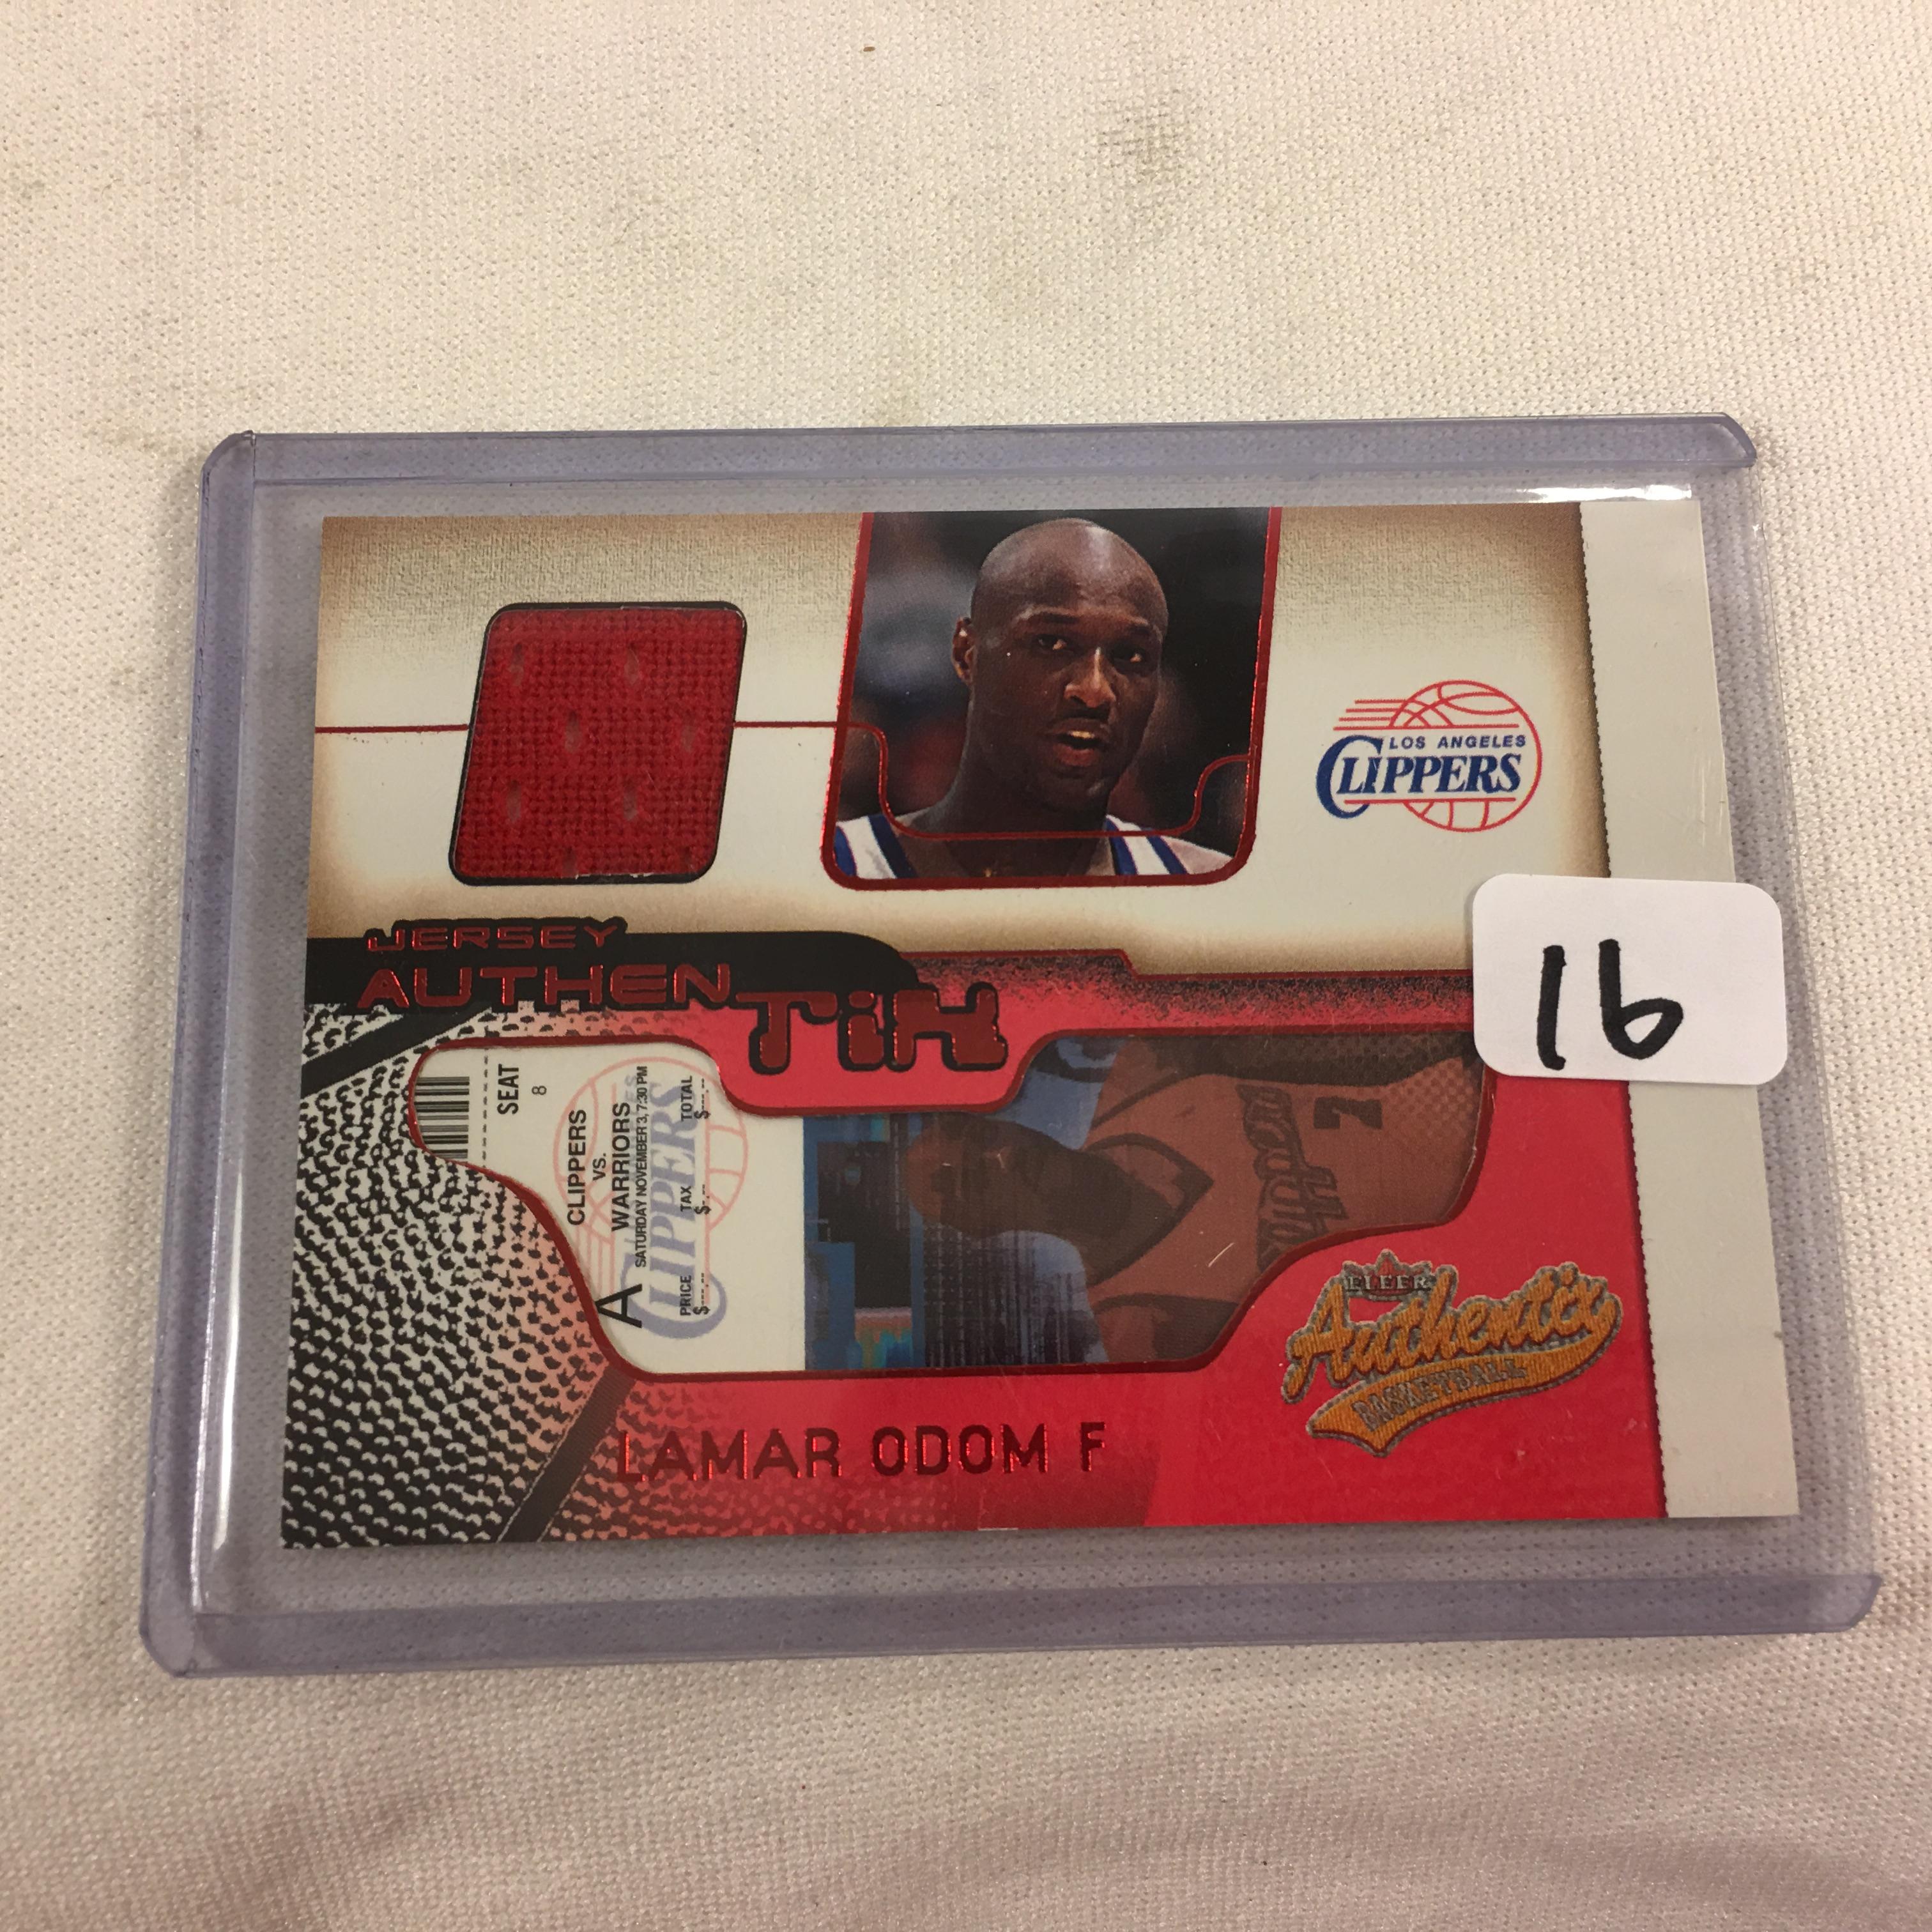 Collector 2001 NBA Fleer Lamar Odom LA Clippers Jersey Authentik Game Worn Jersey Card